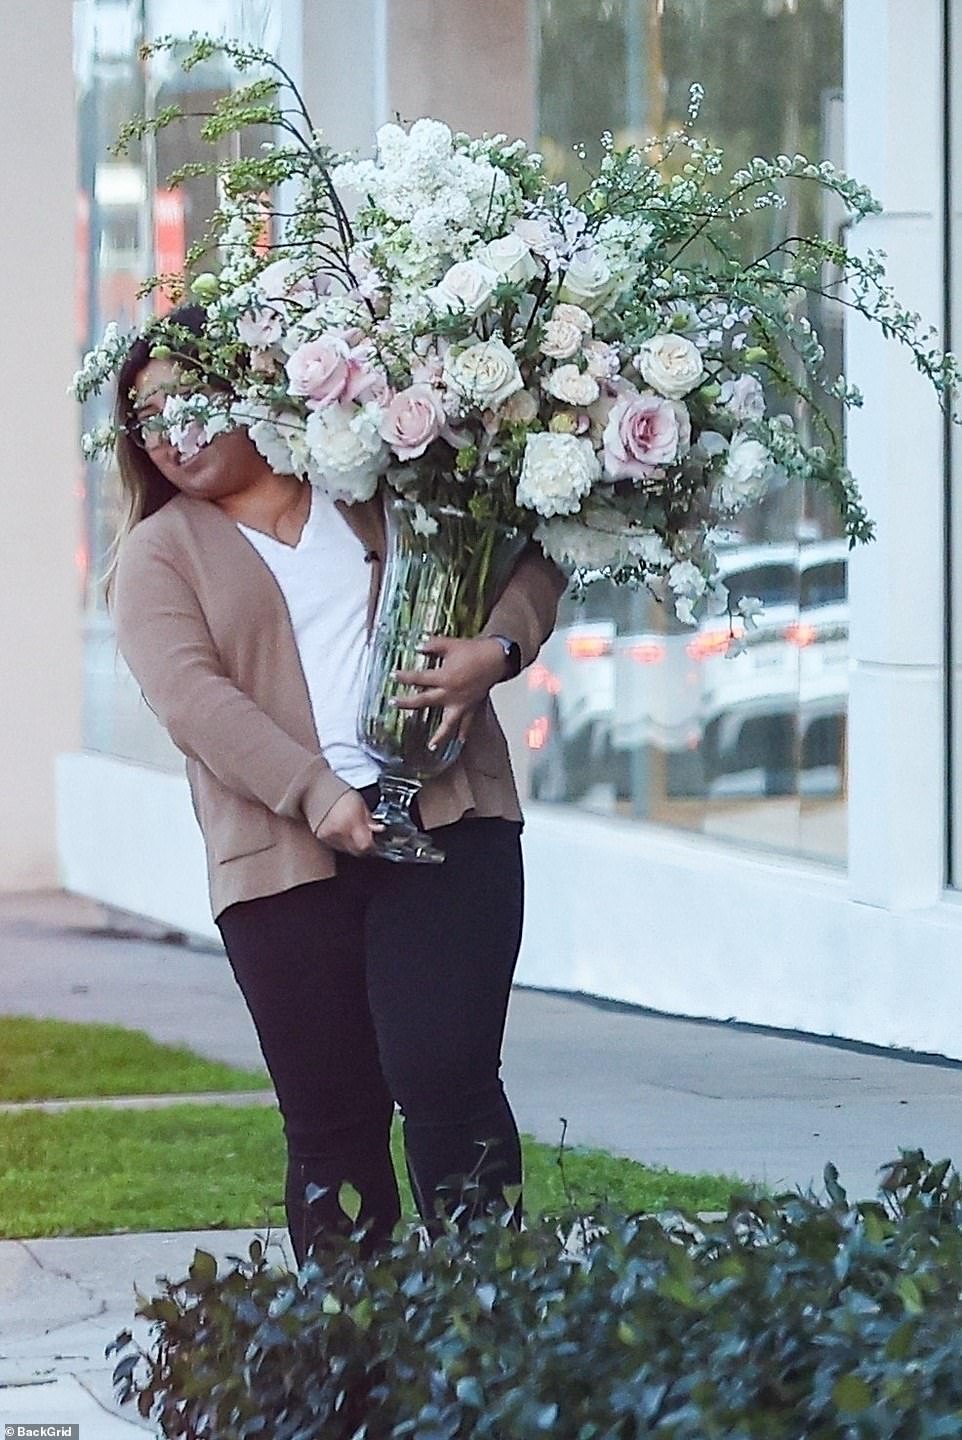 Behind jewelry designer De Ramon was an assistant who could barely bear to carry a large bouquet of roses in a glass vase on legs.  It looked like Ines was taking home the big Valentine's bouquet that the Troy actor probably sent to her office the day before.